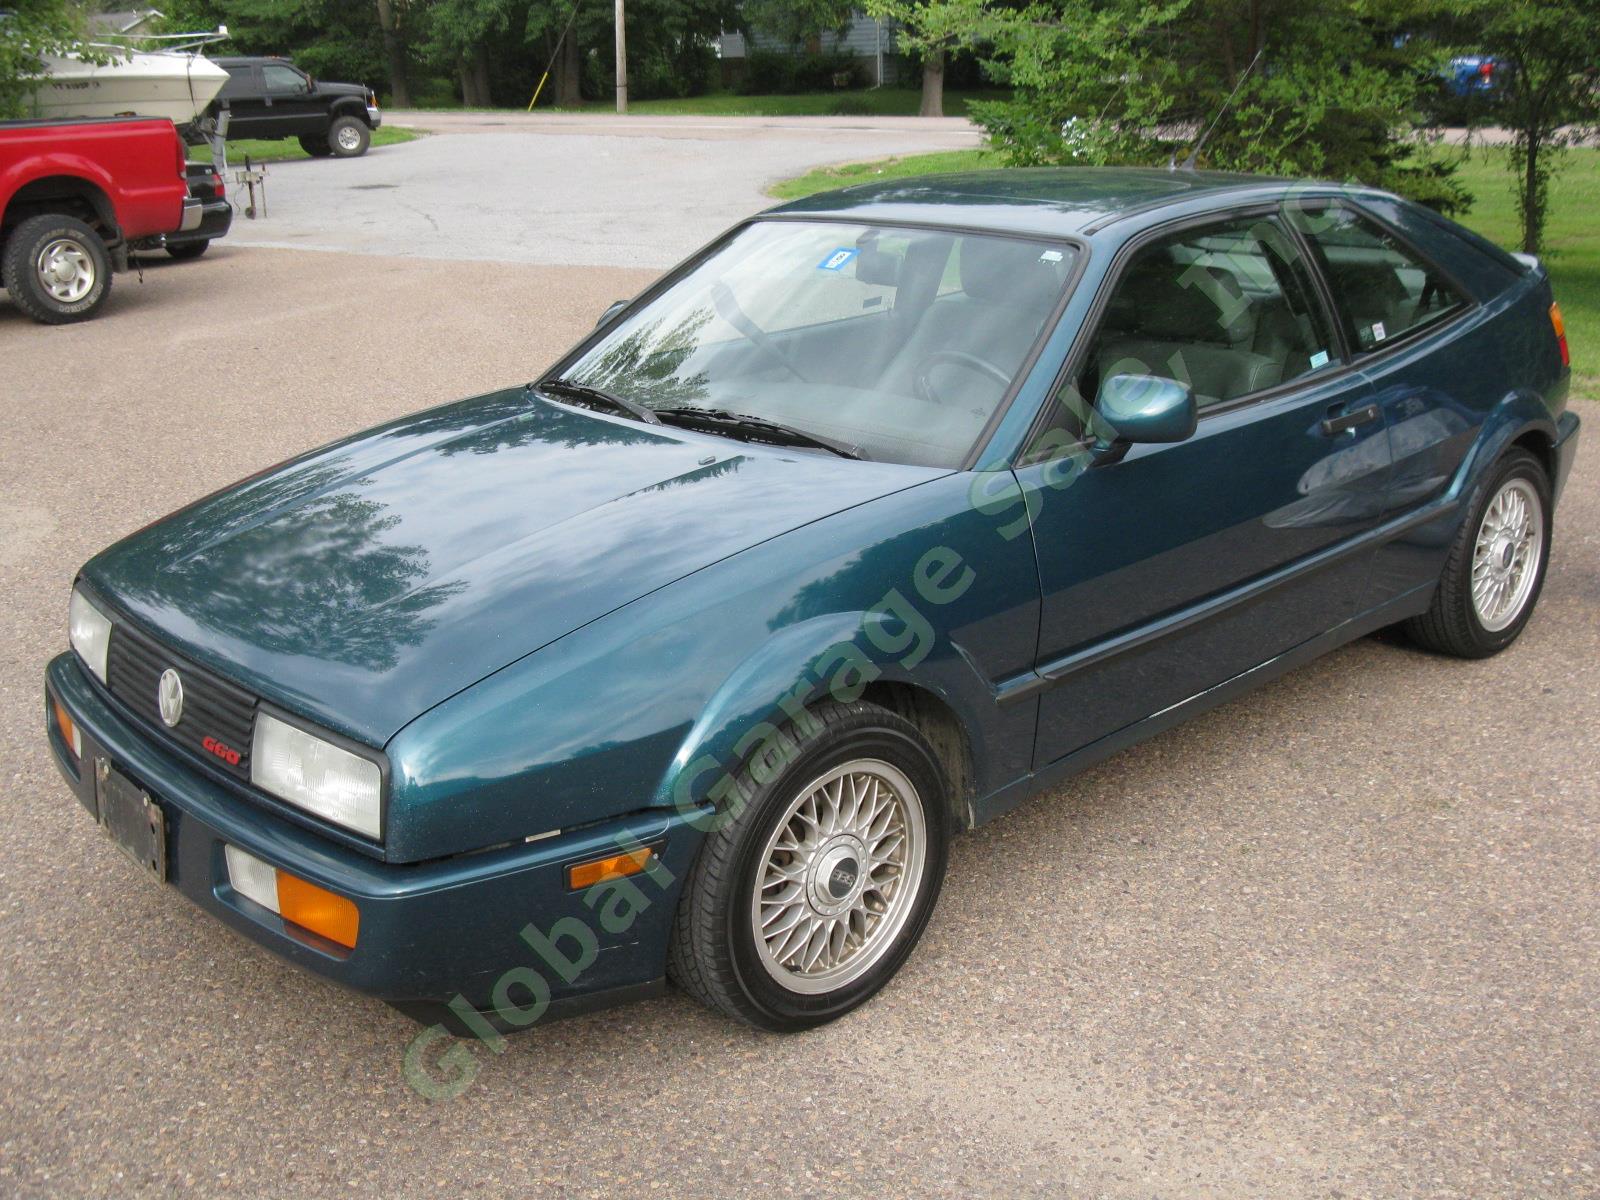 1992 VW Volkswagen Corrado G60 Supercharged 158hp 1.8L 5-Spd One Owner LOW PRICE 1